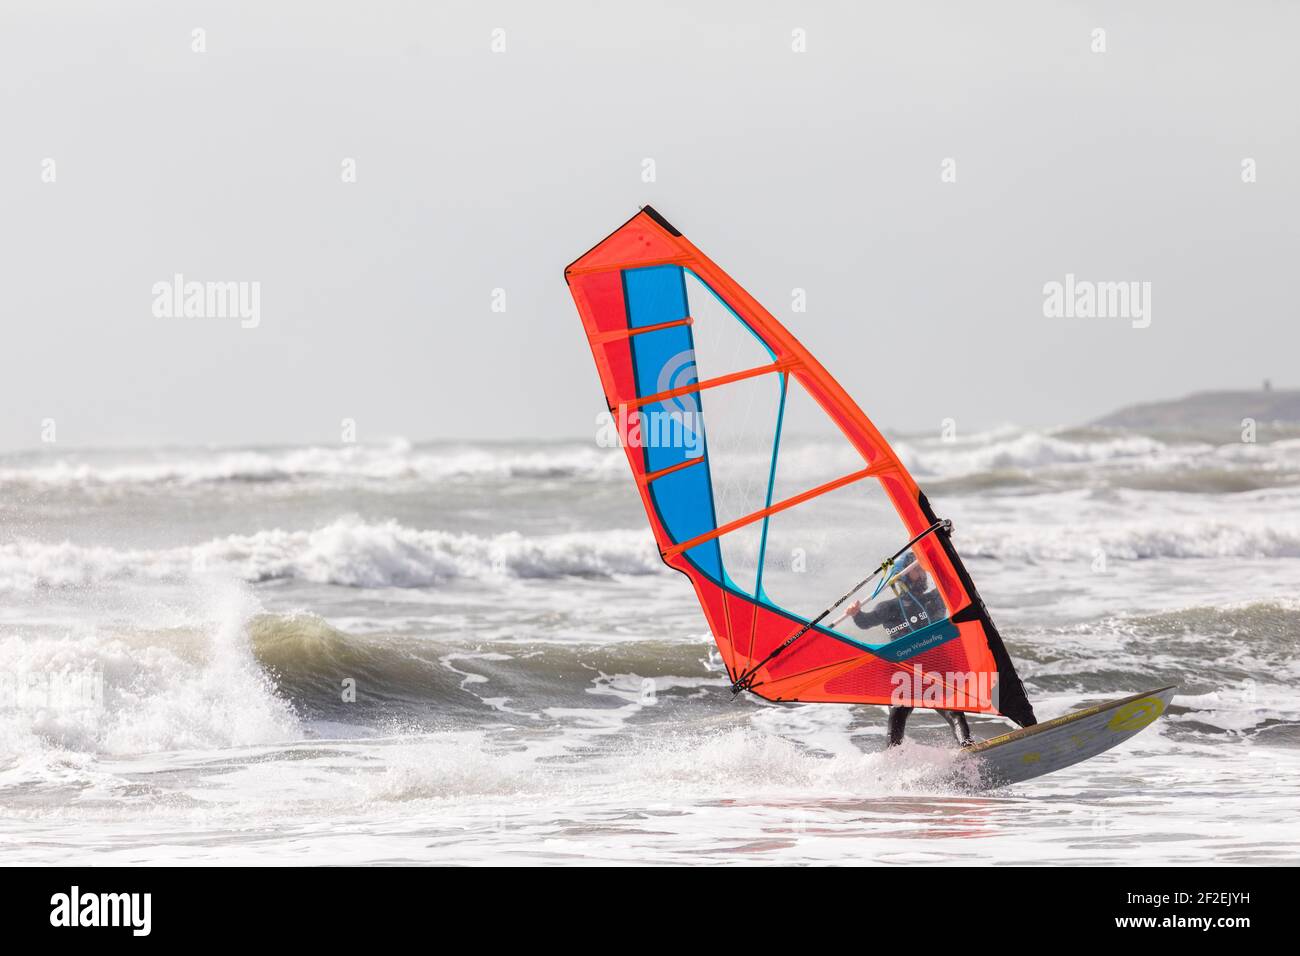 Garrylucas, Cork, Ireland. 11th March, 2021. In the aftermath of an overnight storm a winsurfer takes advantage of the high winds and rough seas at Garrylucas, Co. Cork, Ireland.  - Credit; David Creedon / Alamy Live News Stock Photo